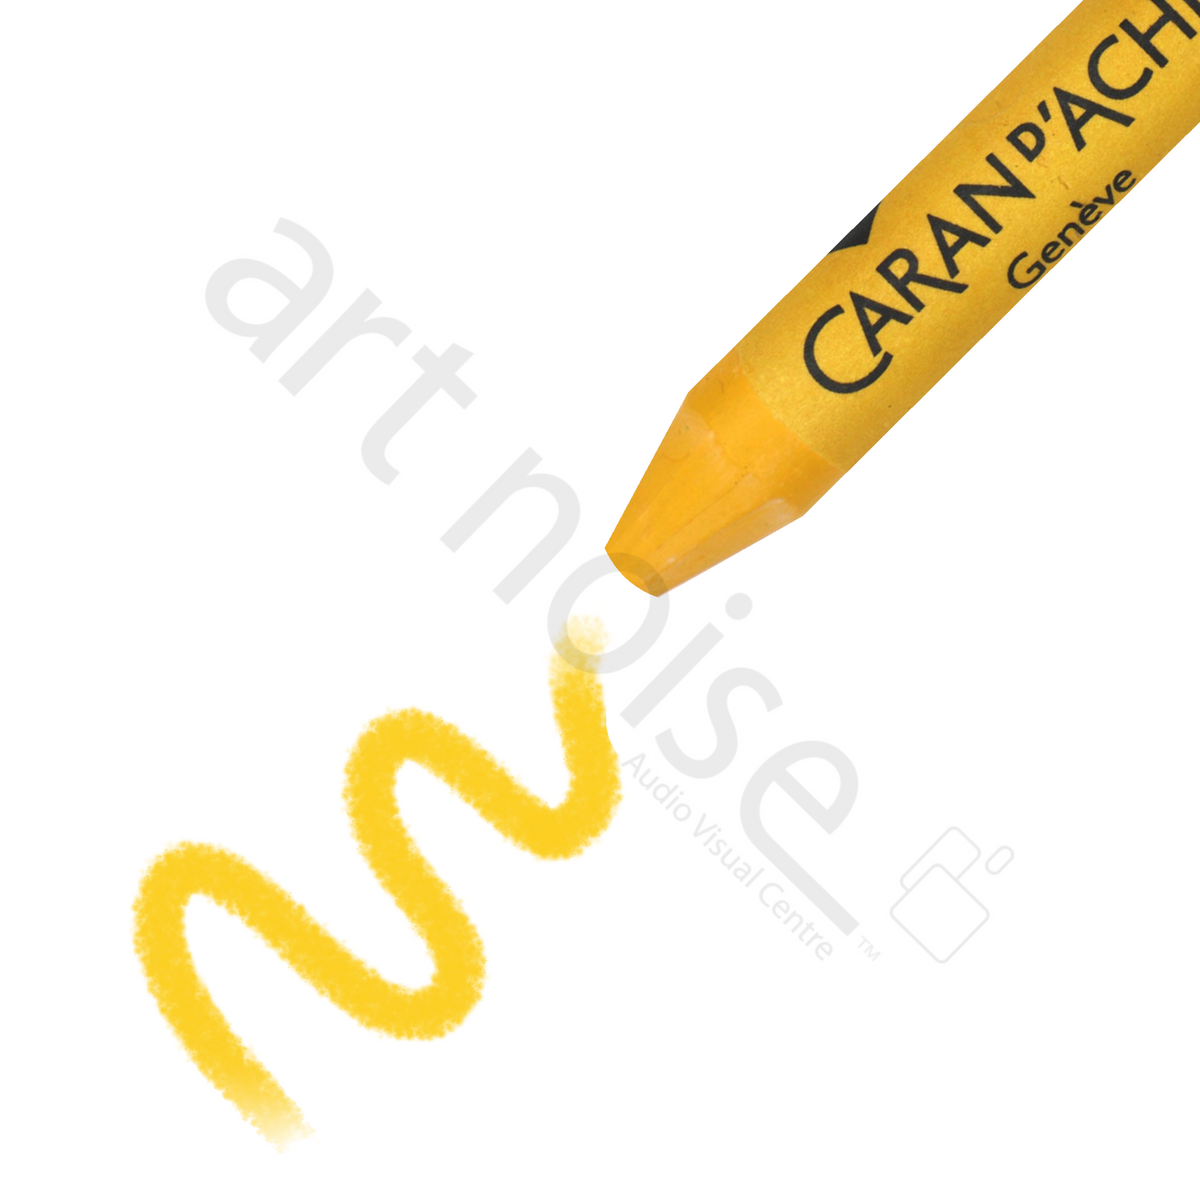 Caran d&#39;Ache - Classic Neocolor II Water Soluble Wax Crayon - Reds, Orange and Yellows